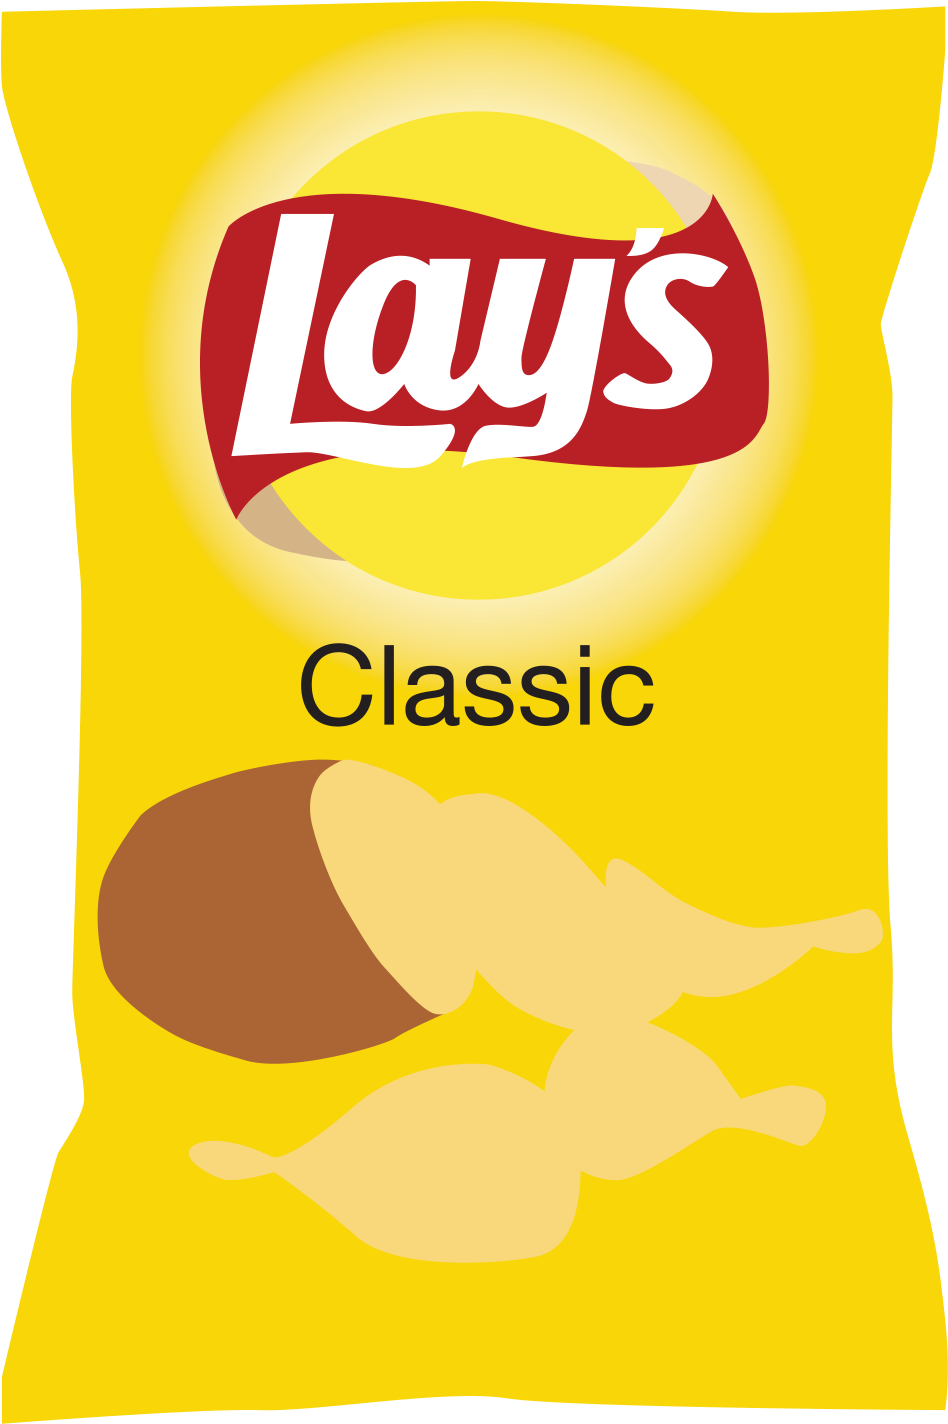 On The Right We Have A Generic Potato Chip Brand And - Potato Chip Bag No Background (952x1430)